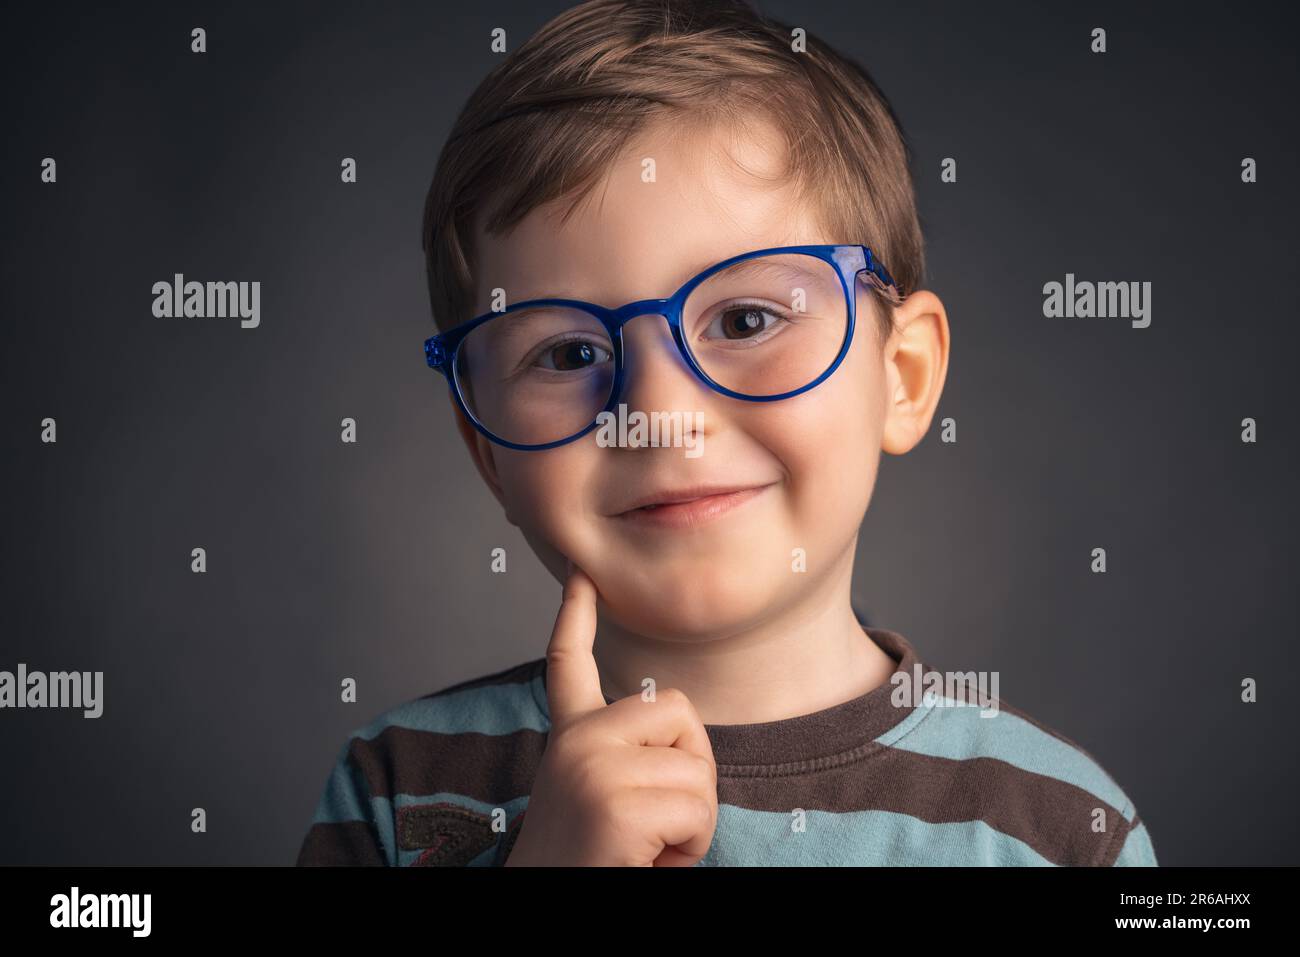 Cute, smile, funny and clever, little boy with glasses, studio portrait on black background. Smart preschooler. Stock Photo